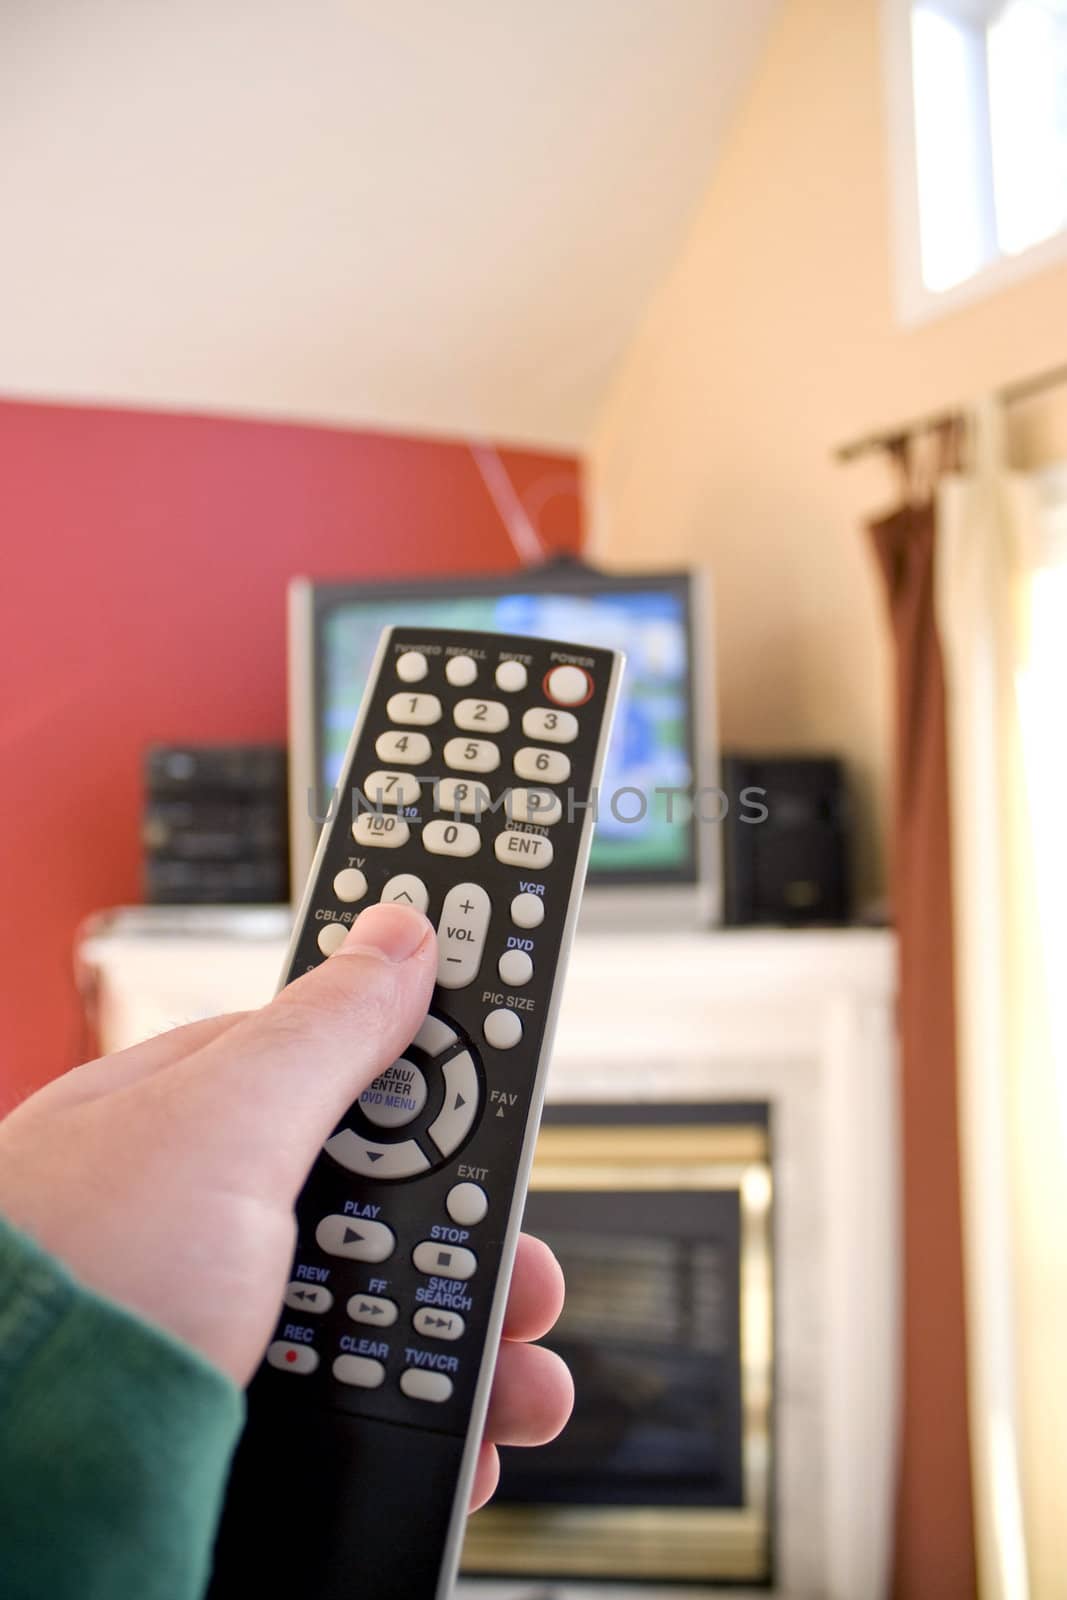 A remote control in hand - shallow depth of field with focus on the remote.